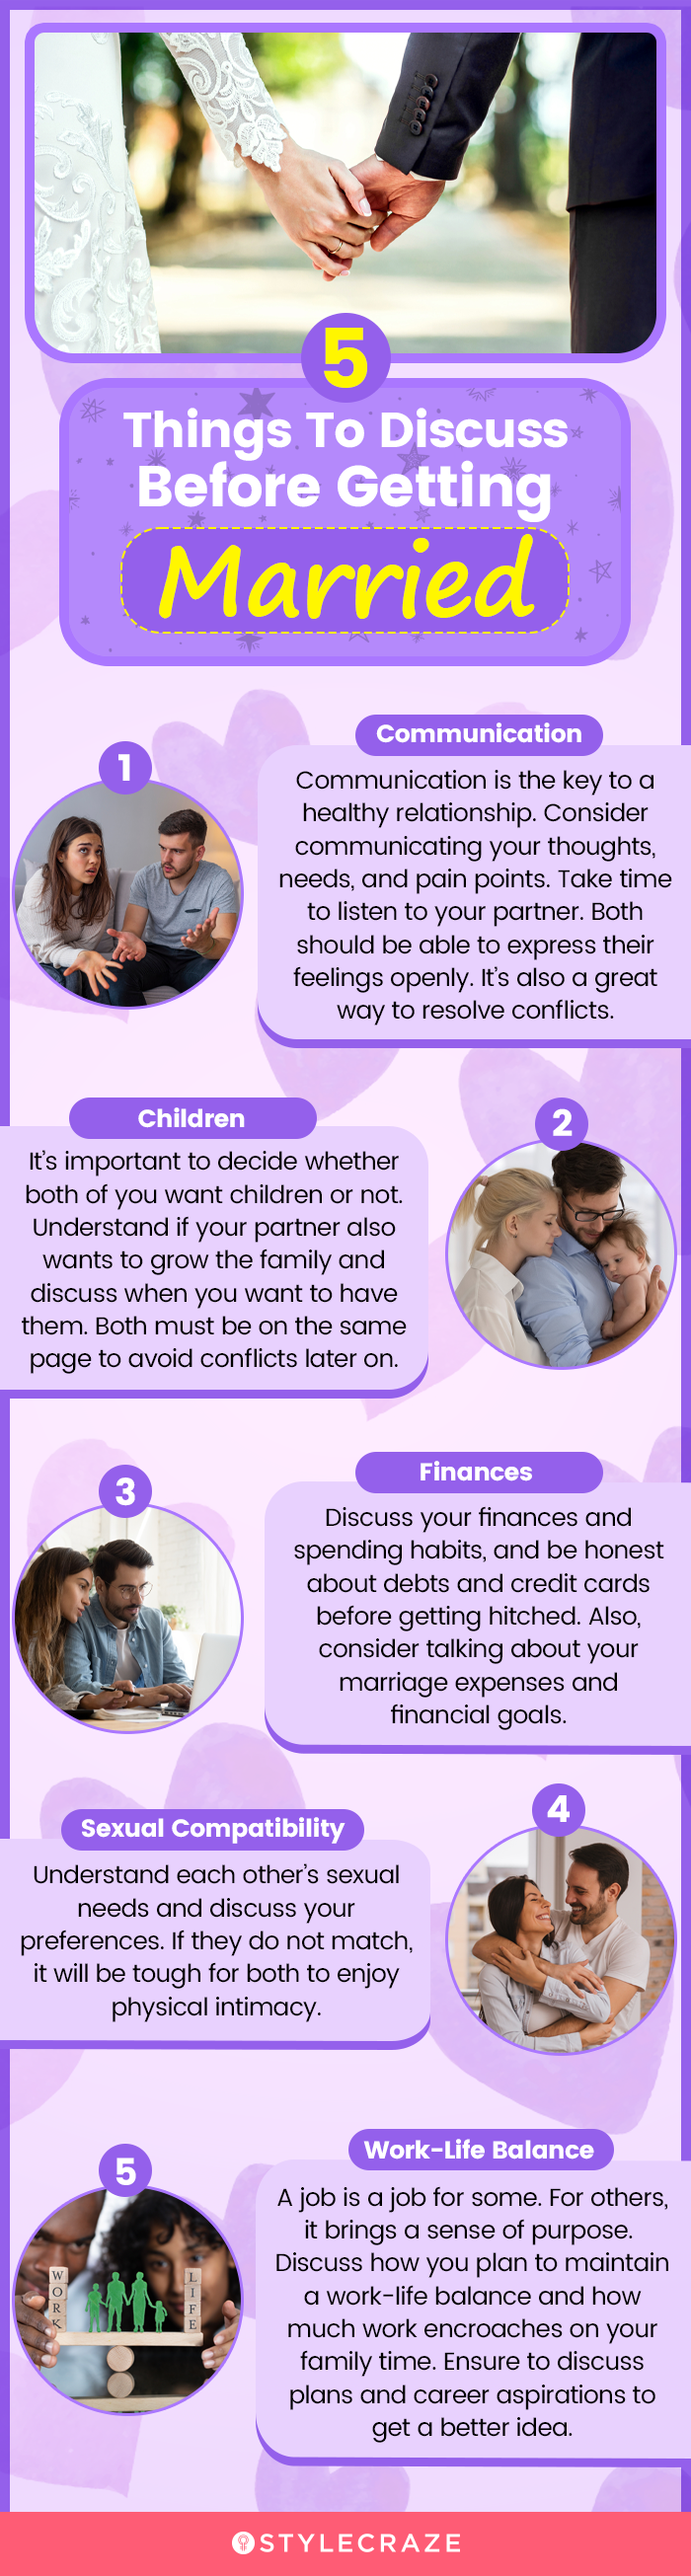 5 things to discuss before getting married (infographic)